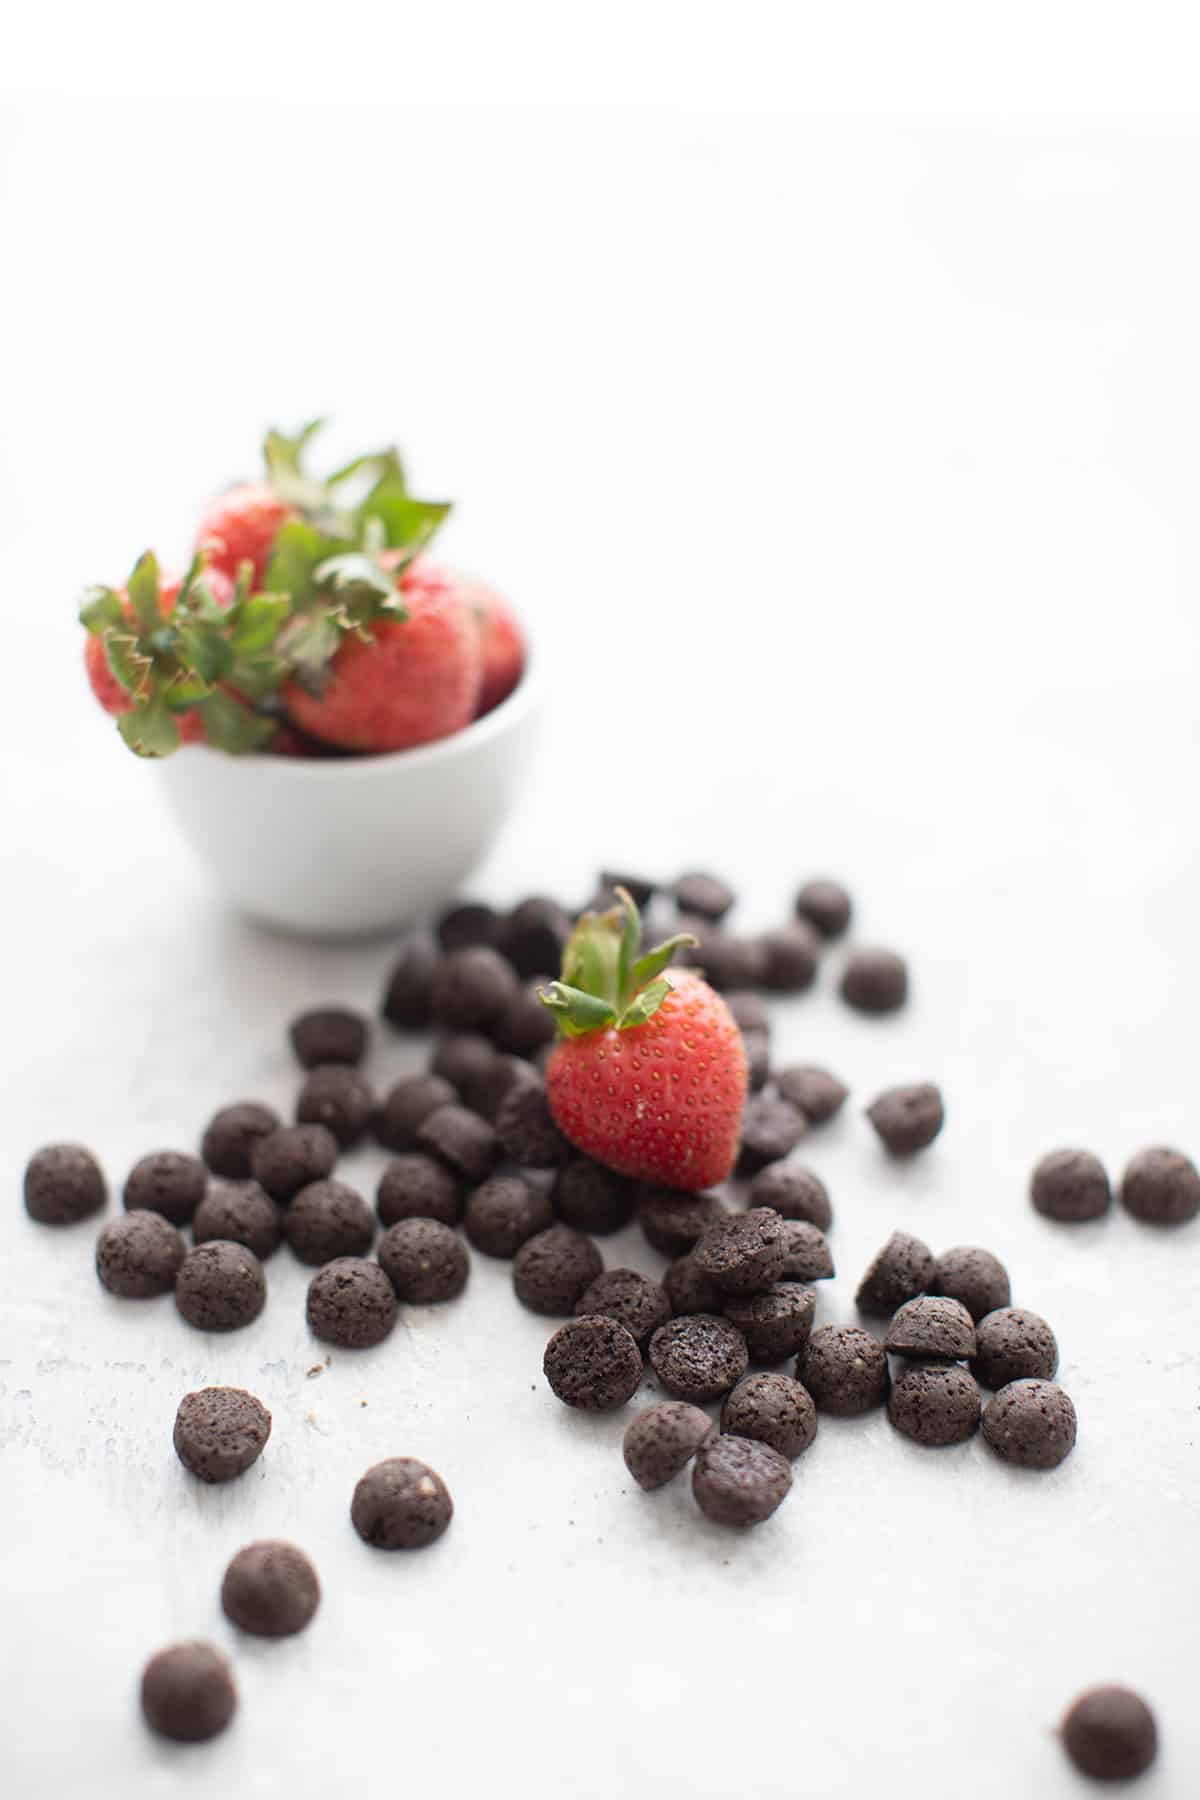 Keto chocolate cereal in a pile with a strawberry on top.